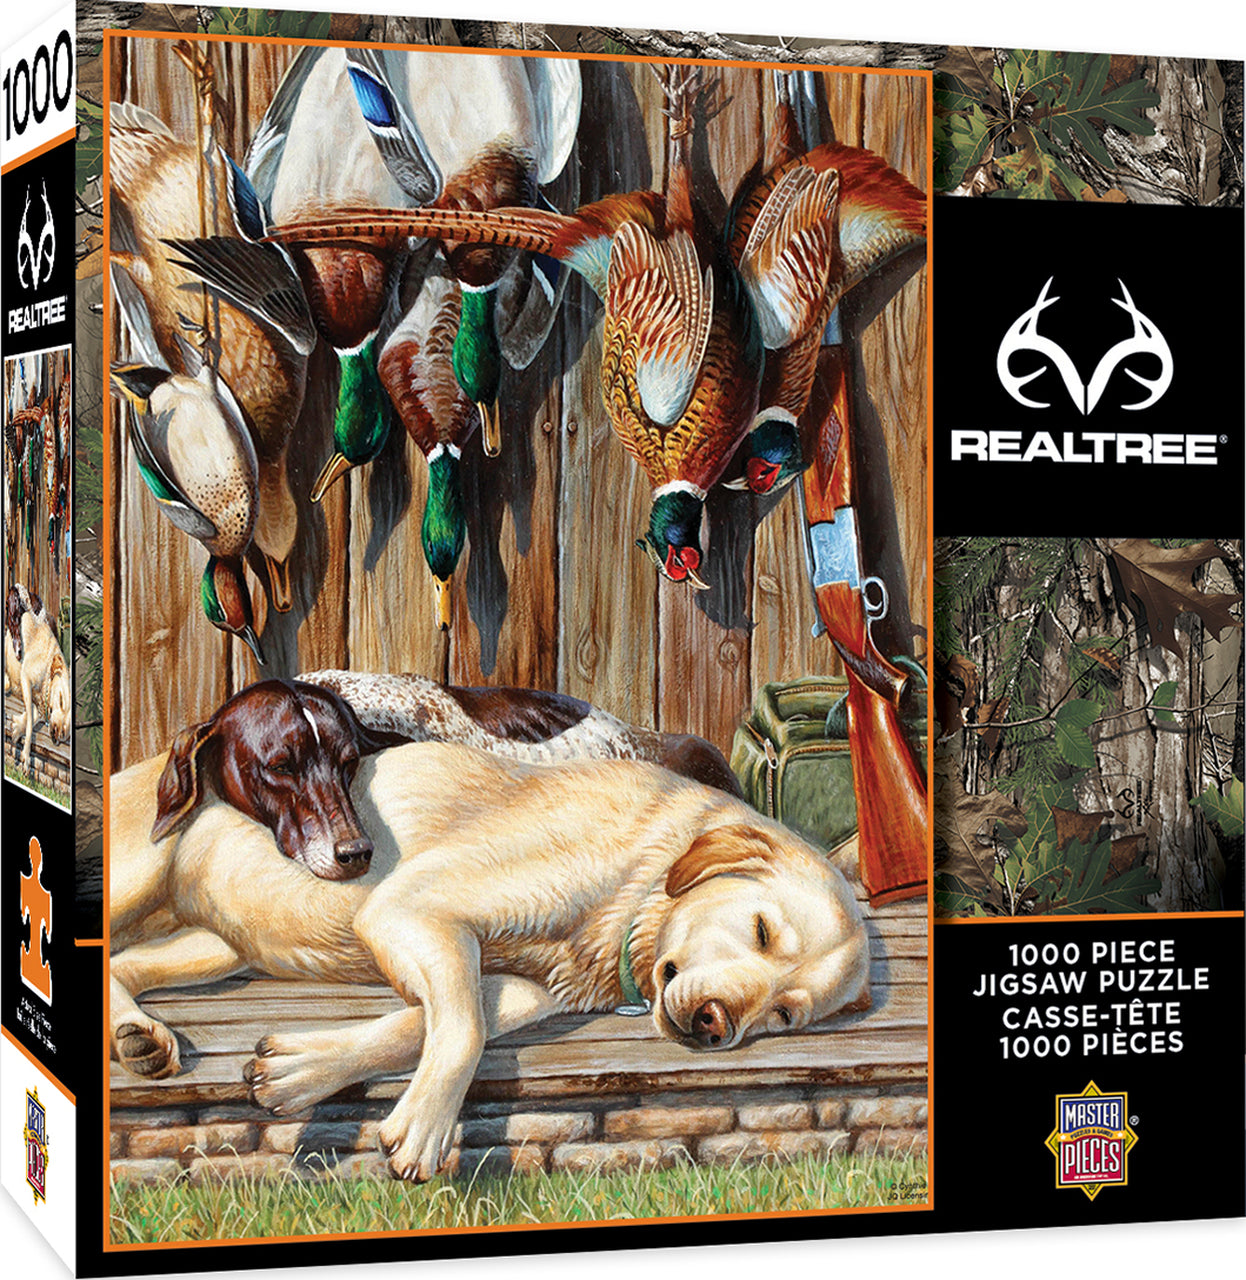 Realtree - All Tuckered Out 1000 Piece Jigsaw Puzzle by Masterpieces